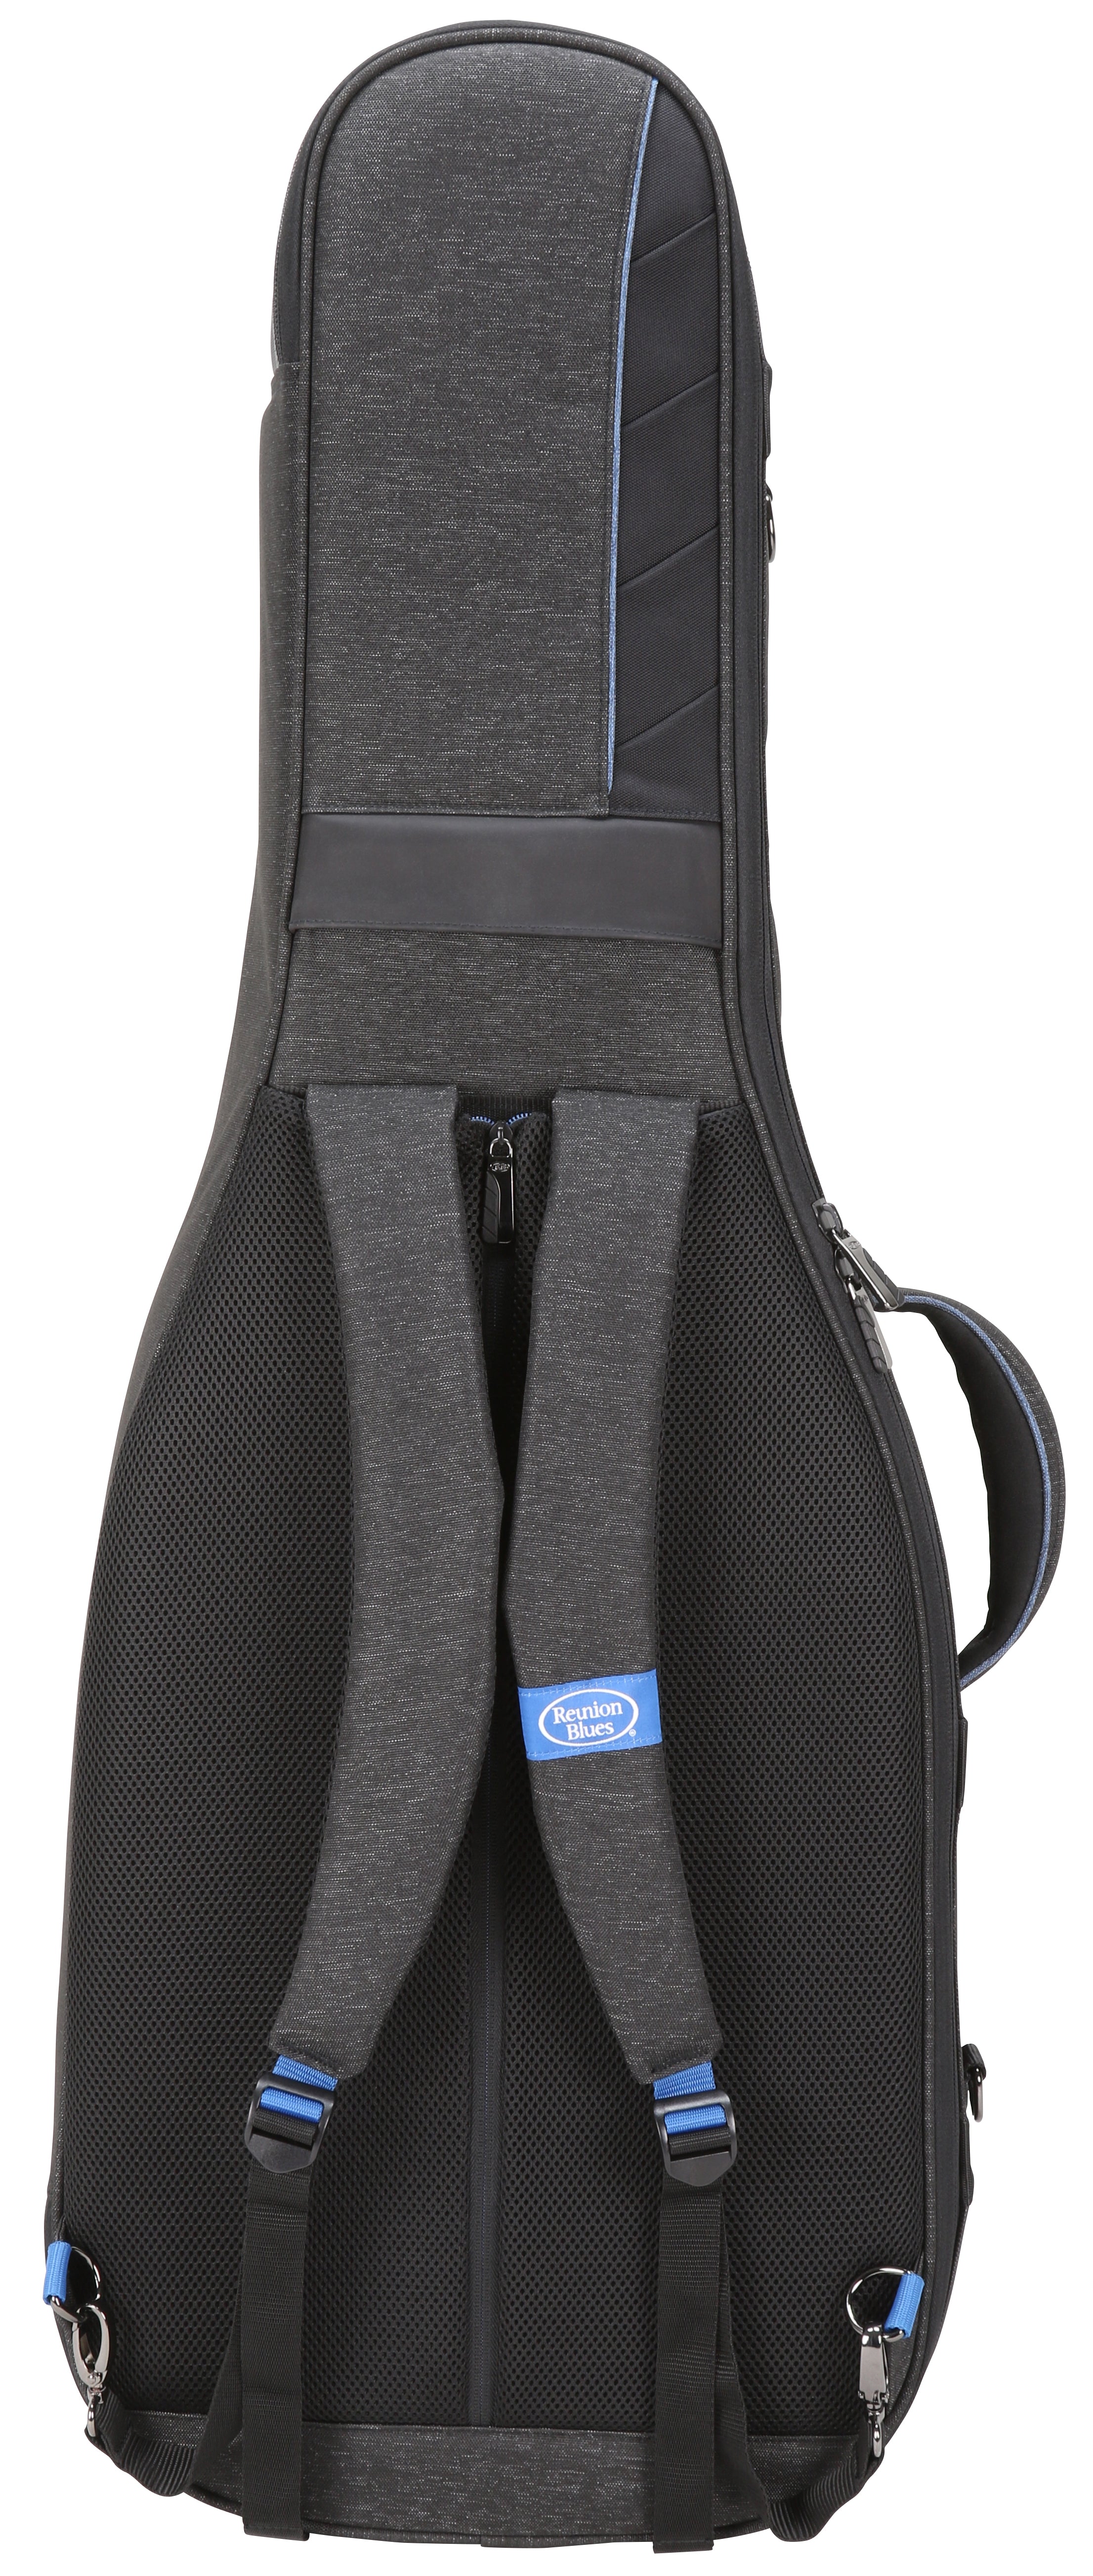 RB Continental Voyager Double Electric Bass Guitar Case - Backpack